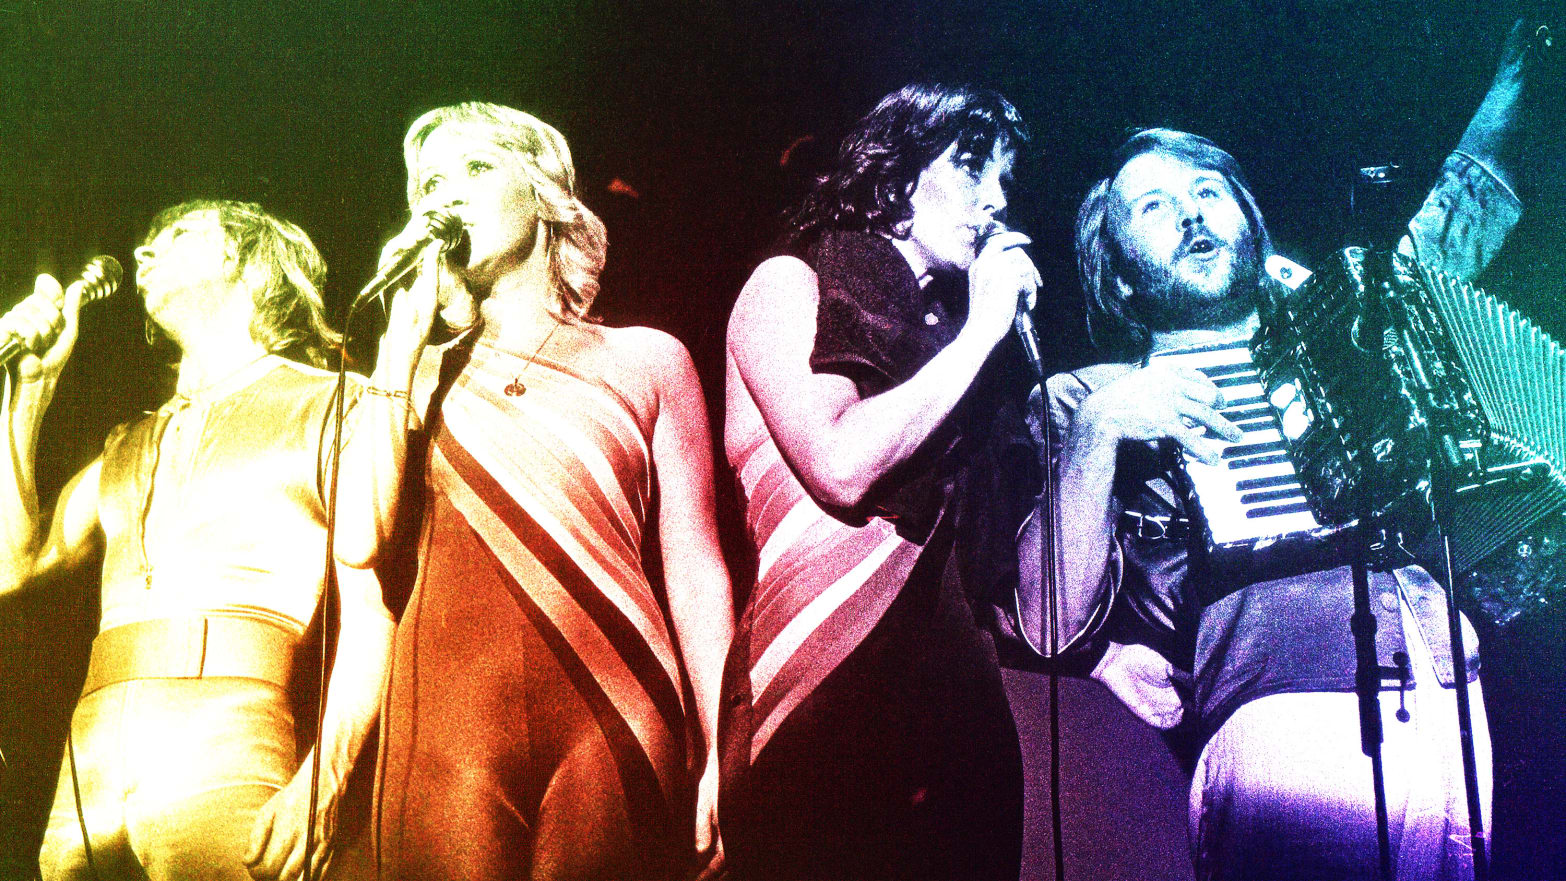 I. Introduction to ABBA and their music